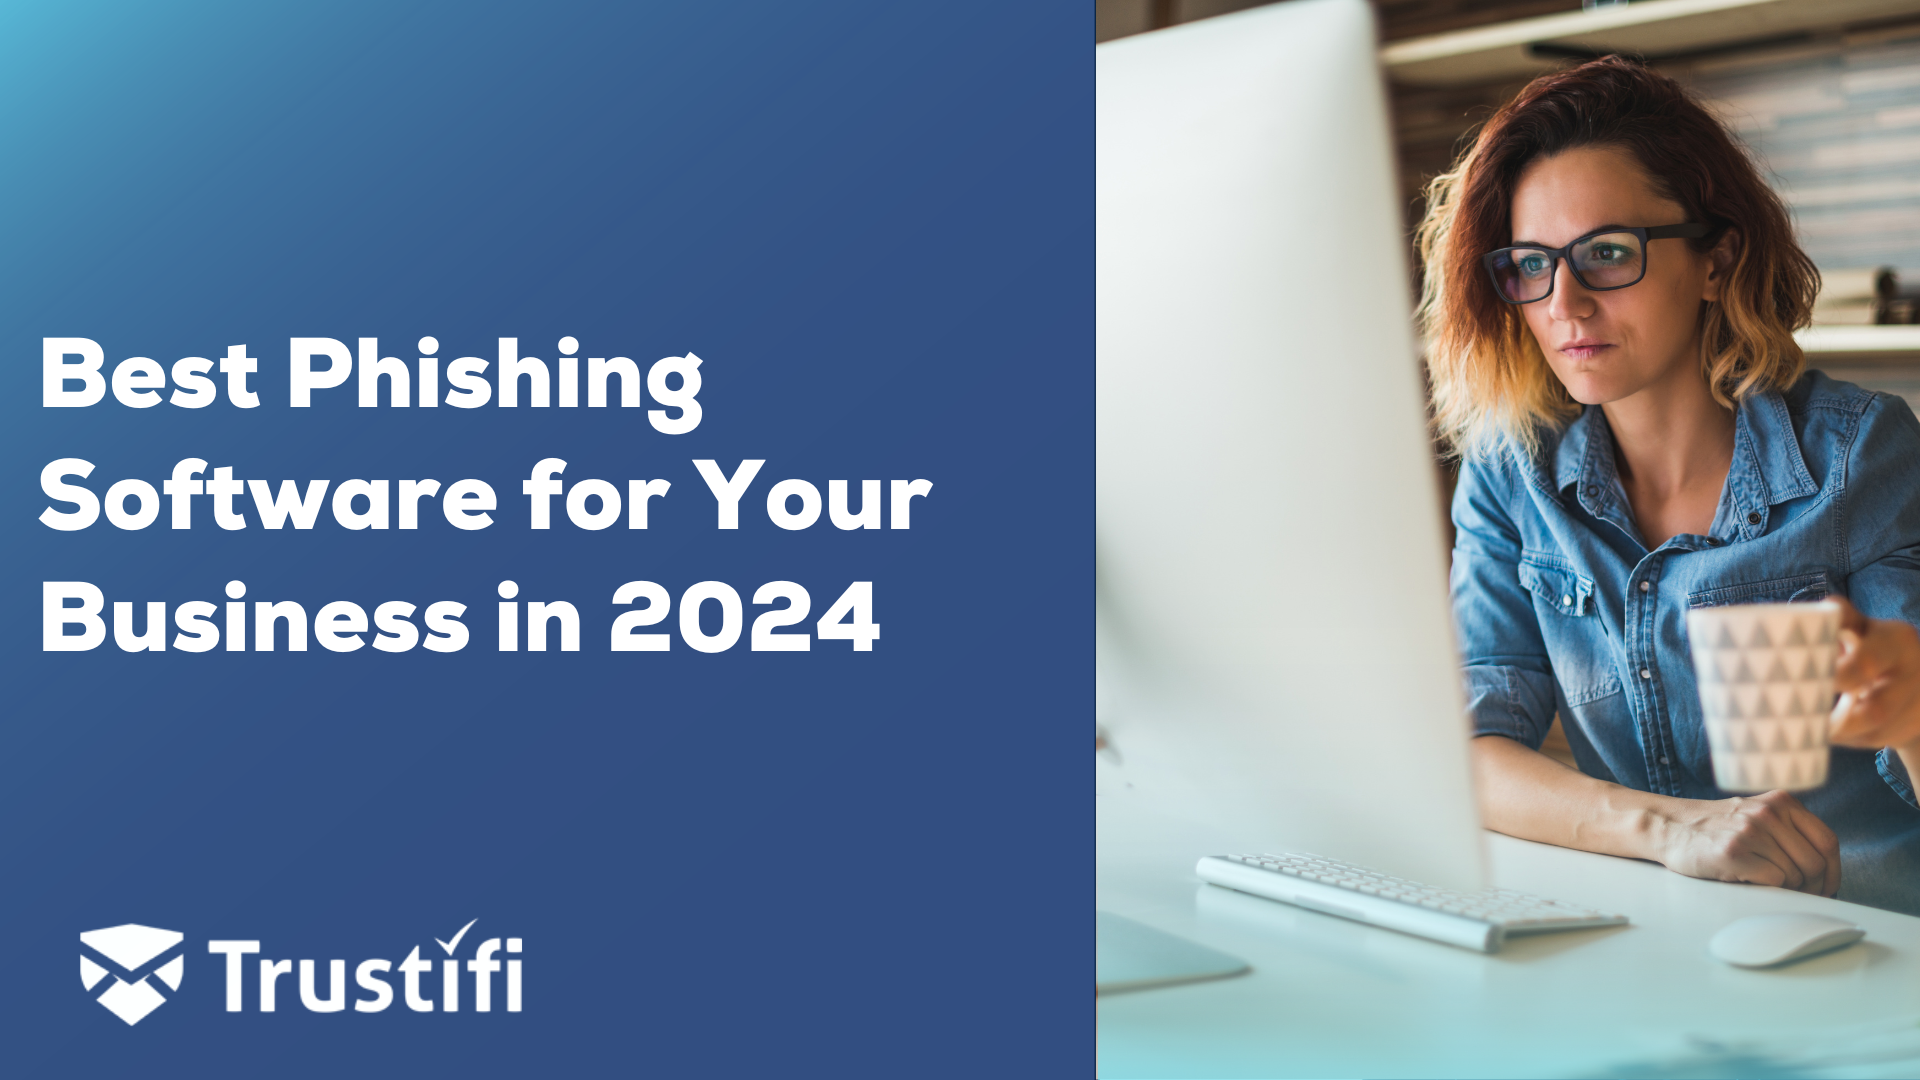 What is the Best Phishing Software for Your Business in 2024?